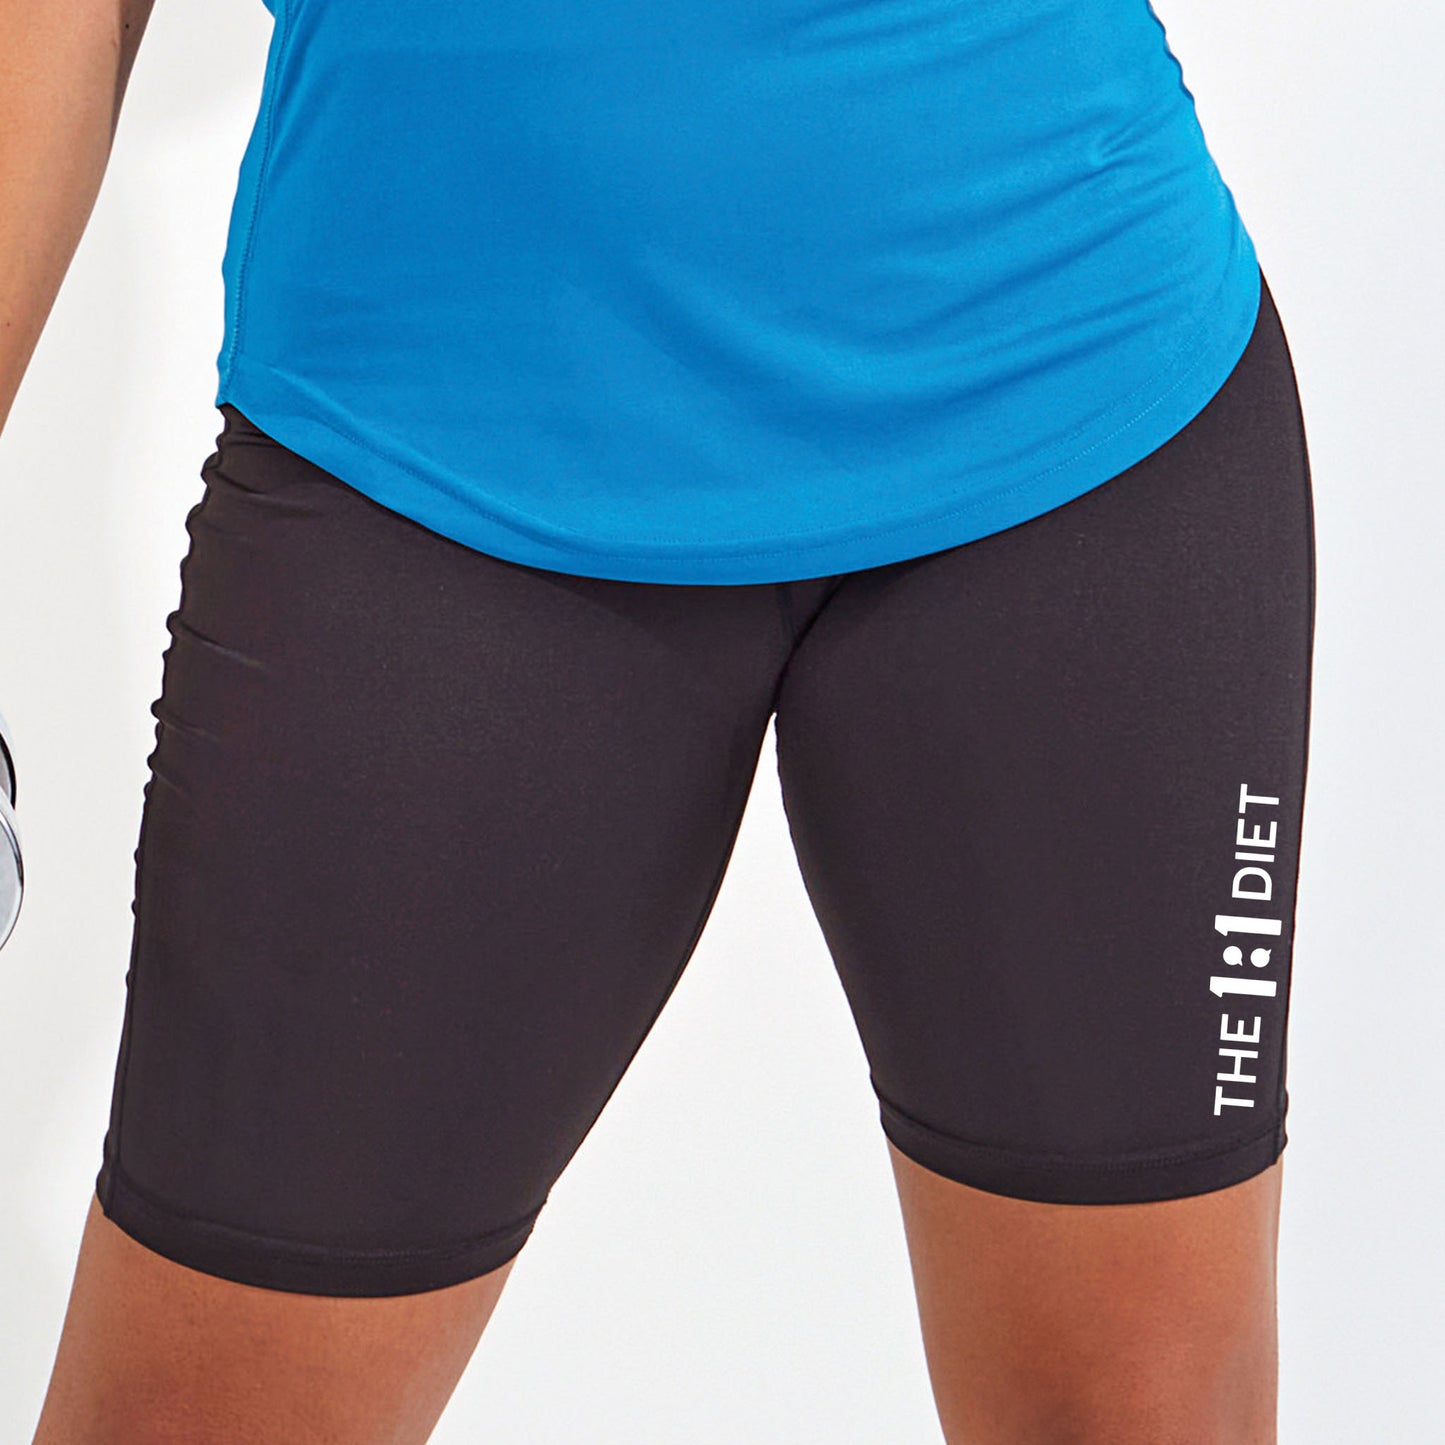 The 1:1 Diet - Ladies Cycling Shorts